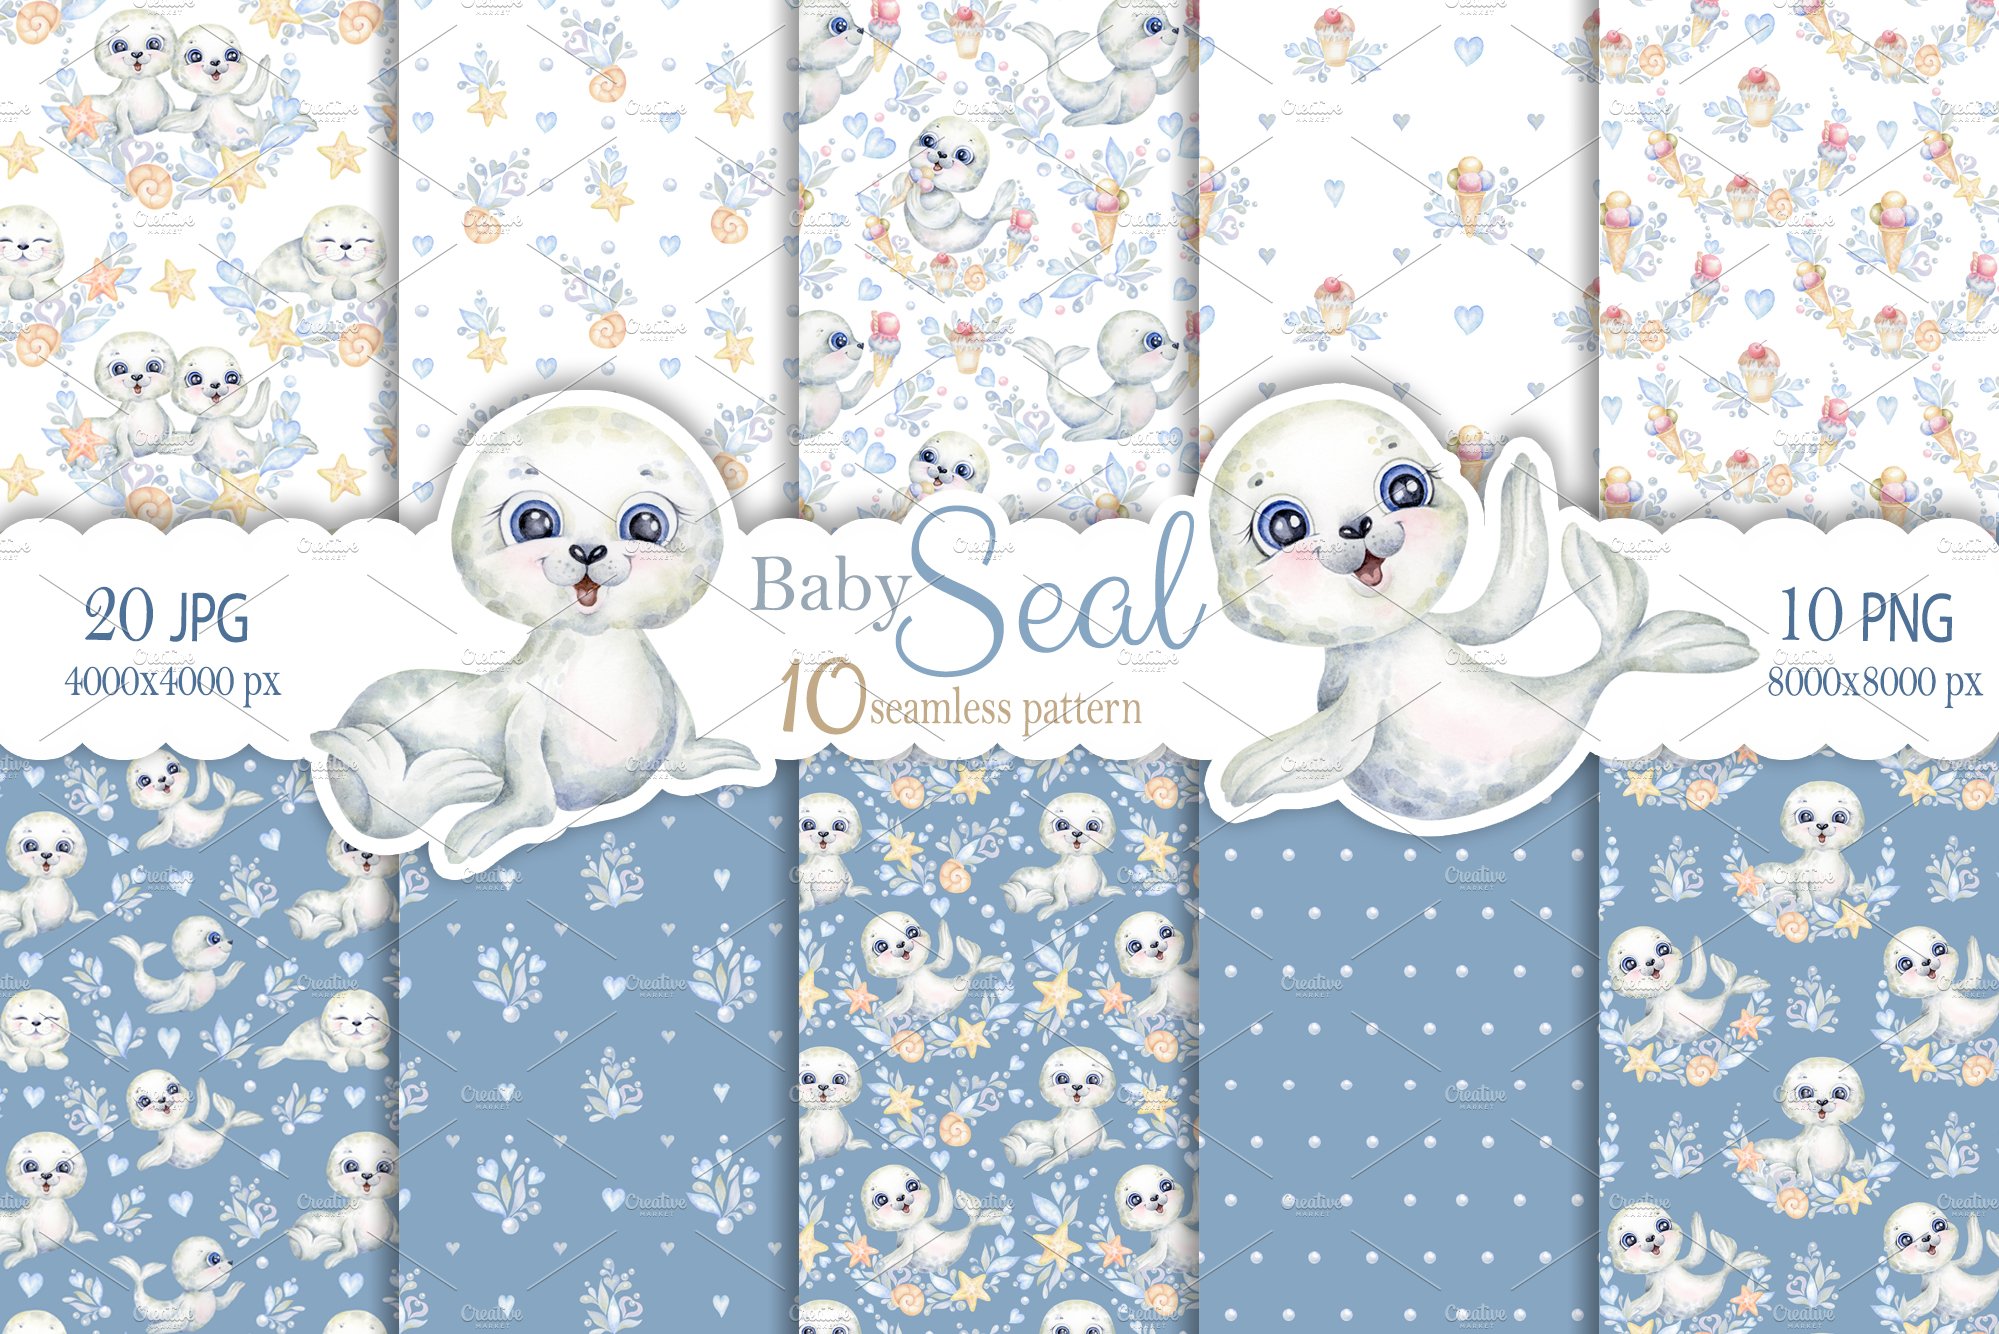 Cute blue patterns with baby seal.